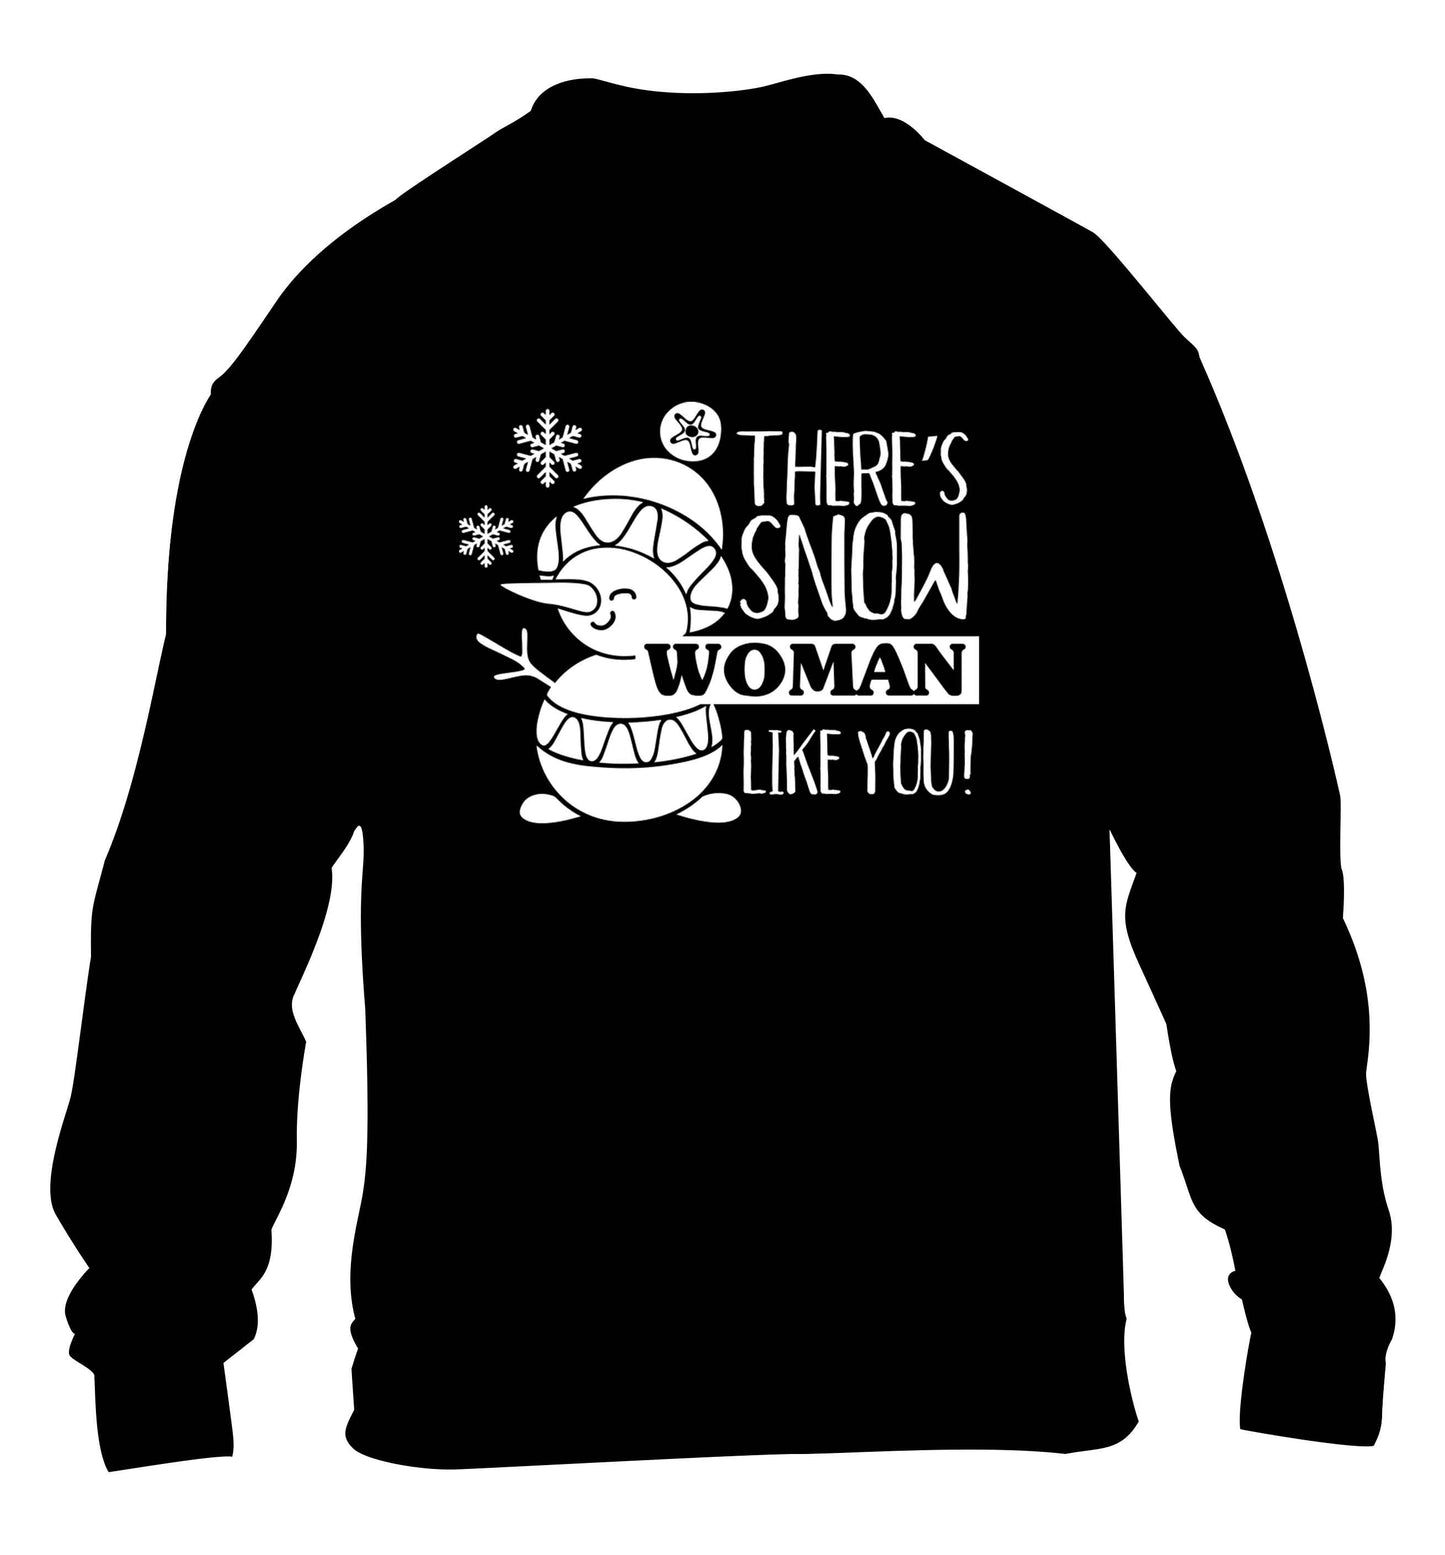 There's snow woman like you children's black sweater 12-13 Years